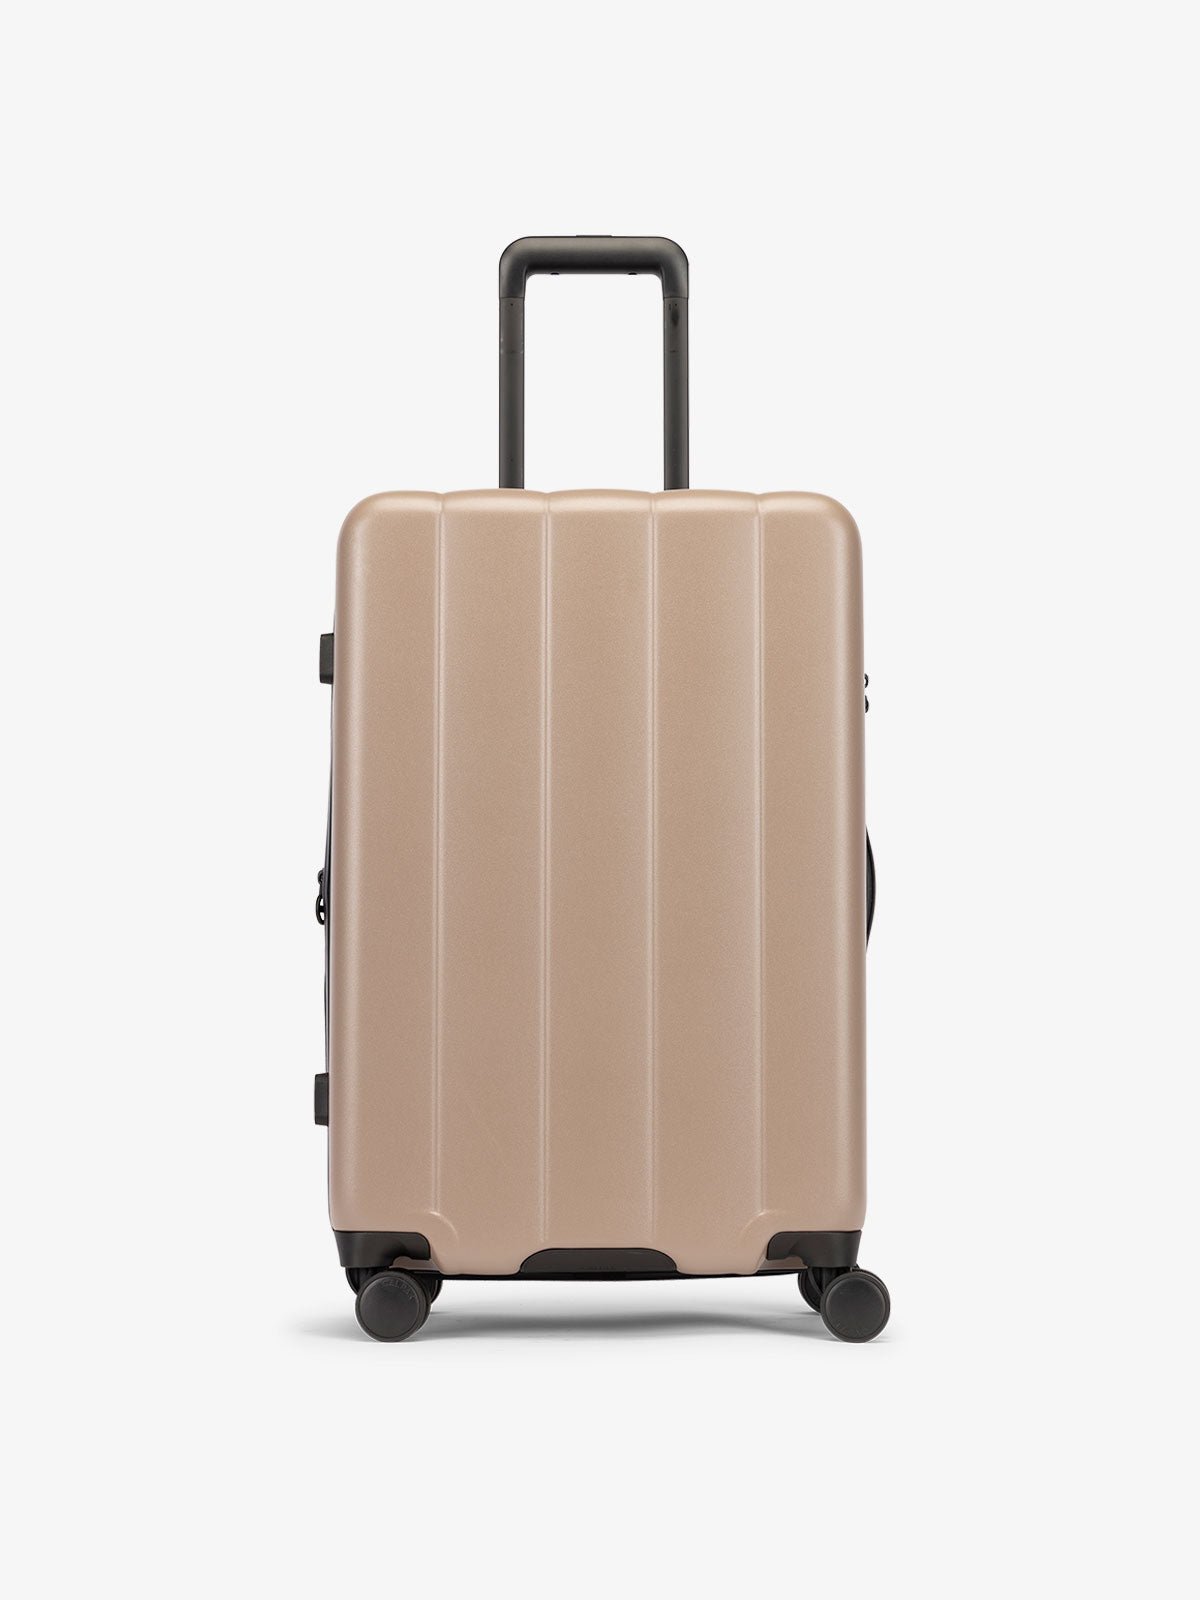 Brown chocolate medium luggage made from an ultra-durable polycarbonate shell and expandable by up to 2"